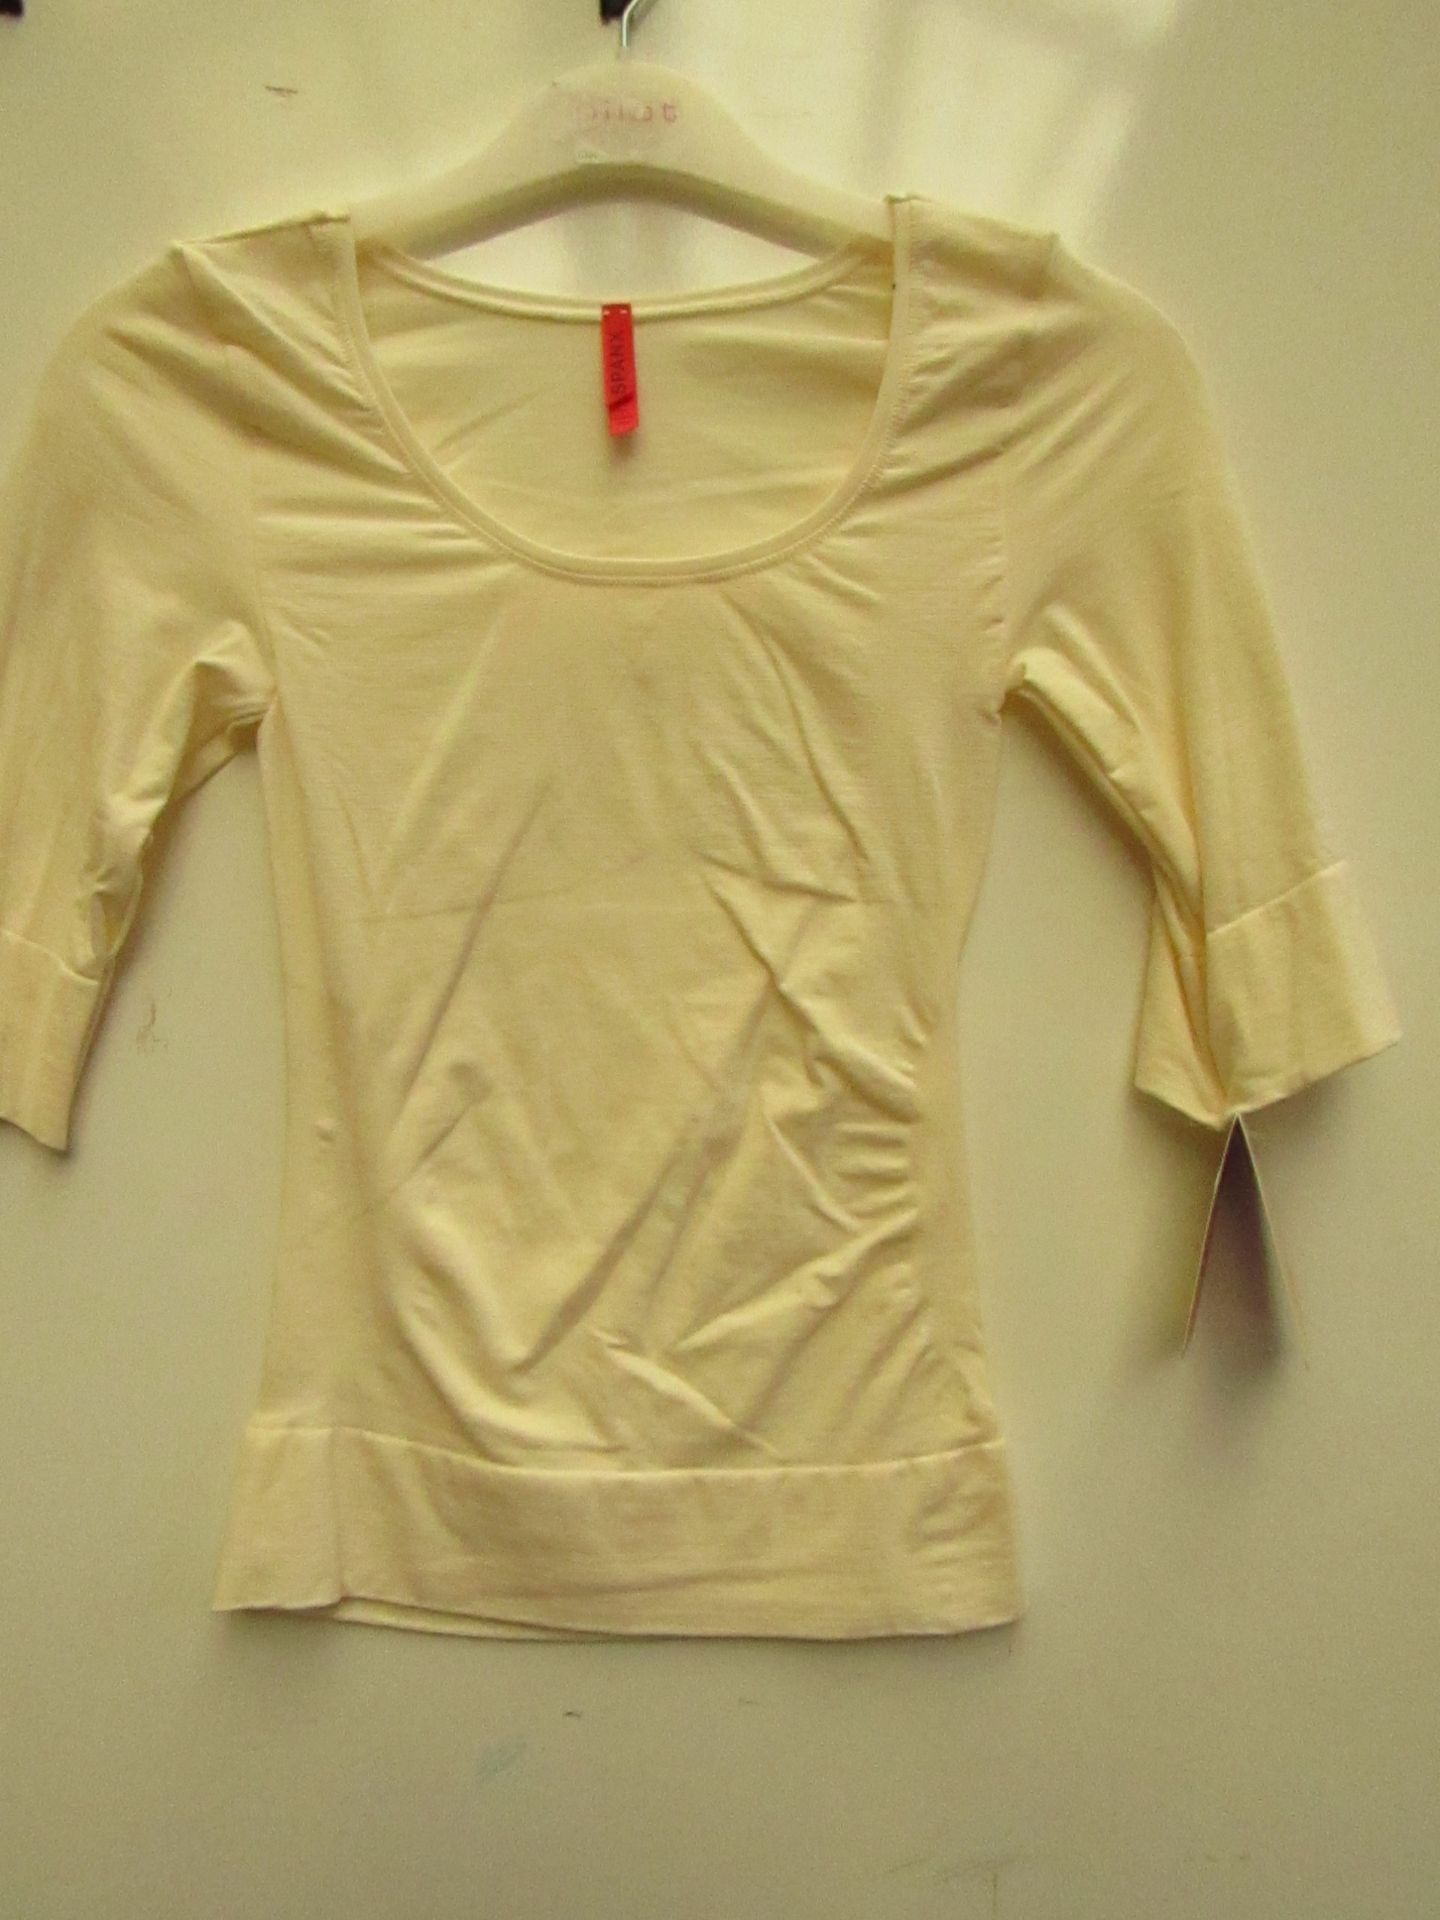 Spanx On Top and In Control Elbow Length Scooped Neck Top size medium RRP £20 new with tag